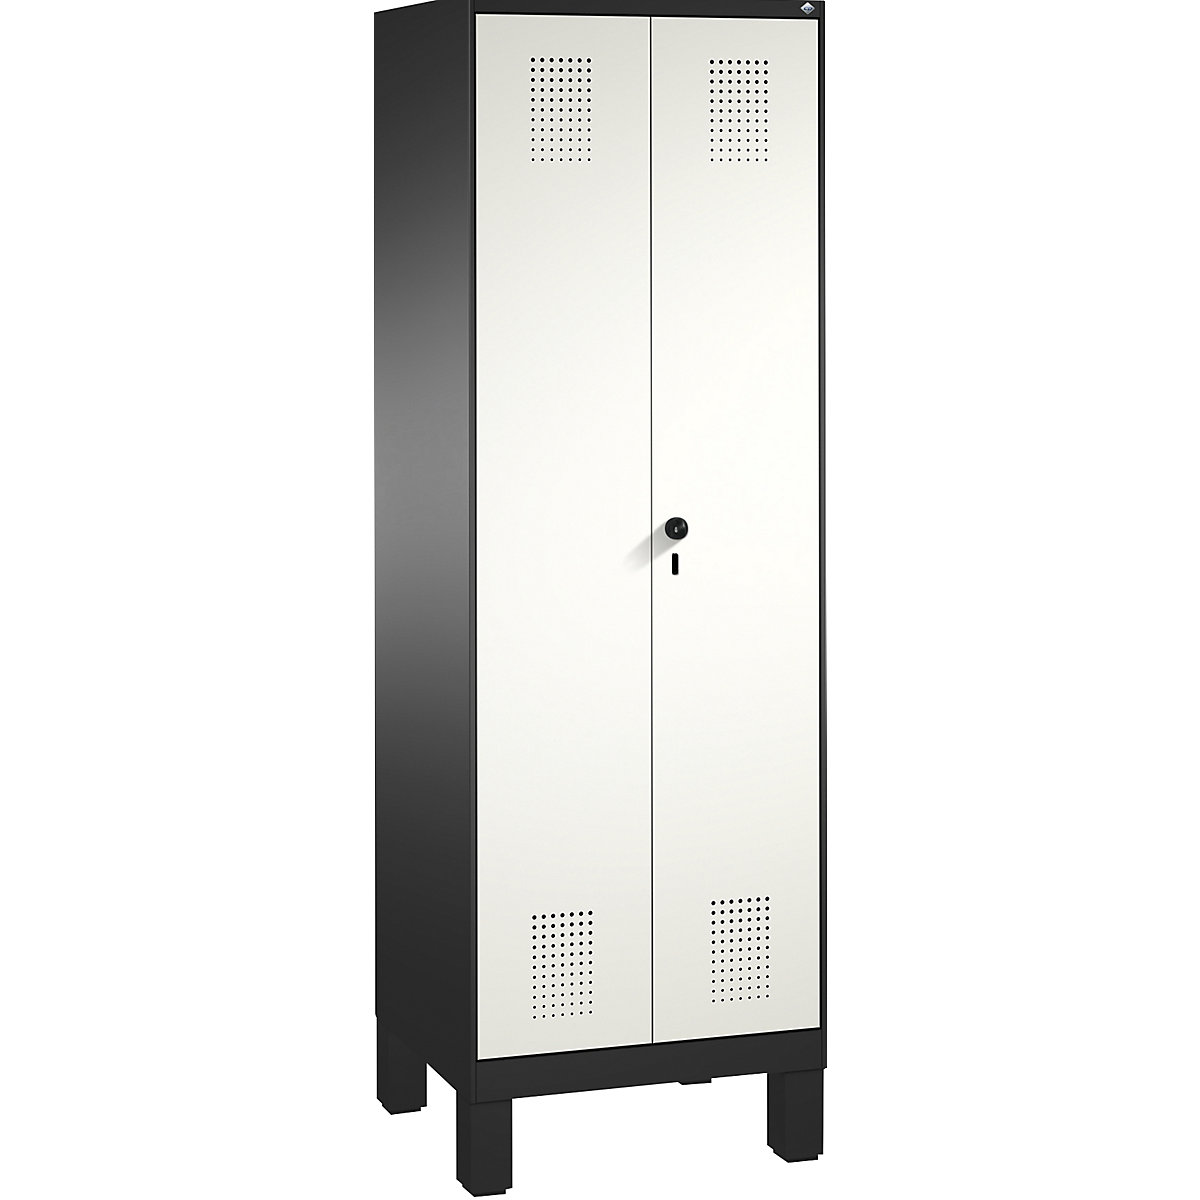 EVOLO storage cupboard, doors close in the middle, with feet – C+P, 2 compartments, 8 shelves, compartment width 300 mm, black grey / traffic white